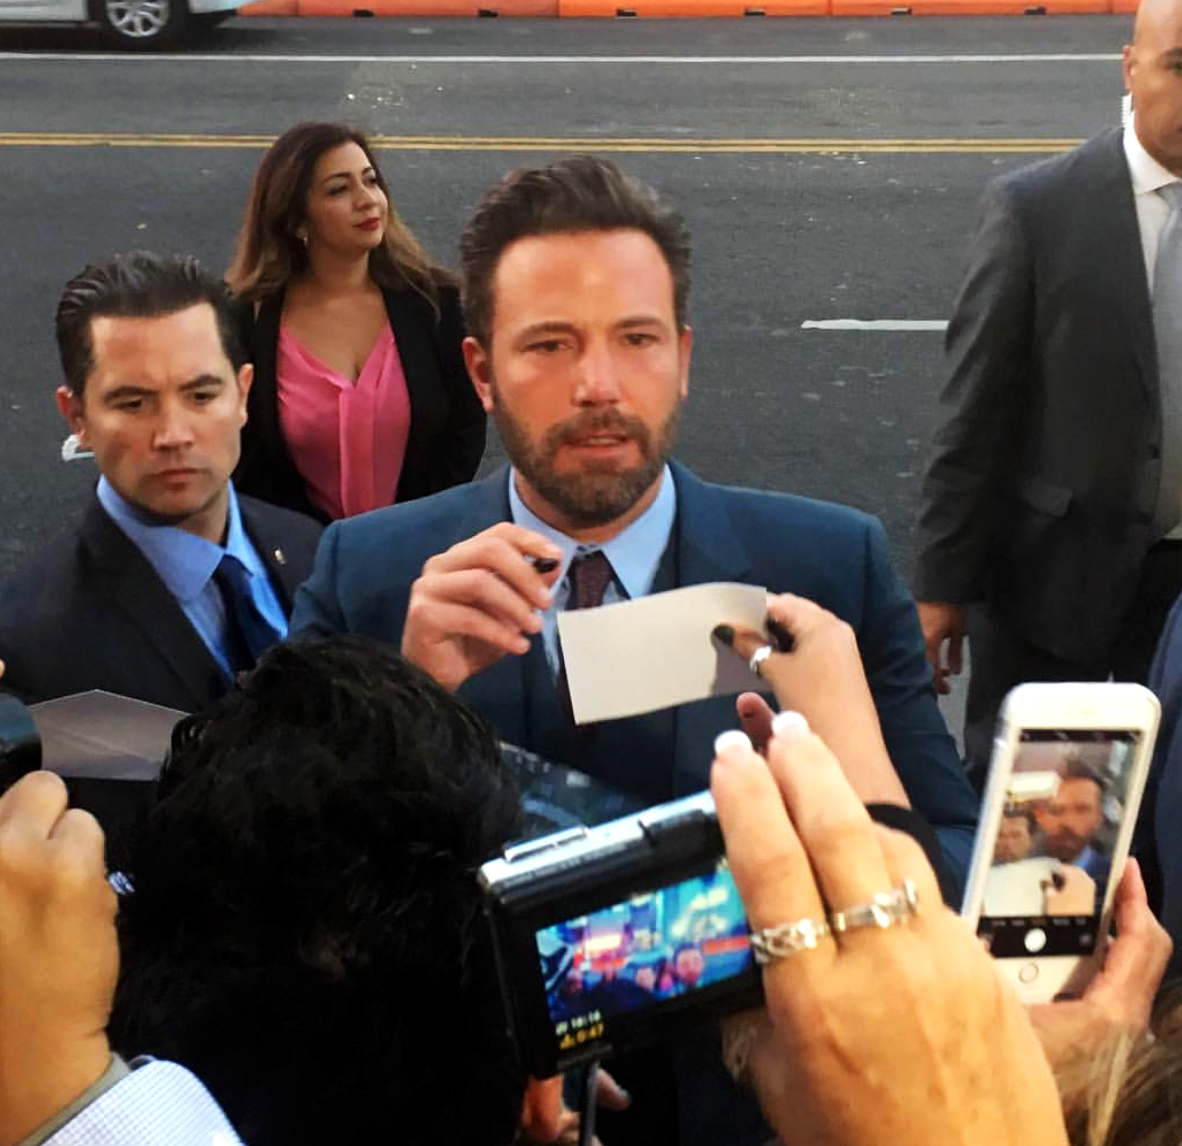 the-accountant-movie-premiere-hollywood-ben-affleck